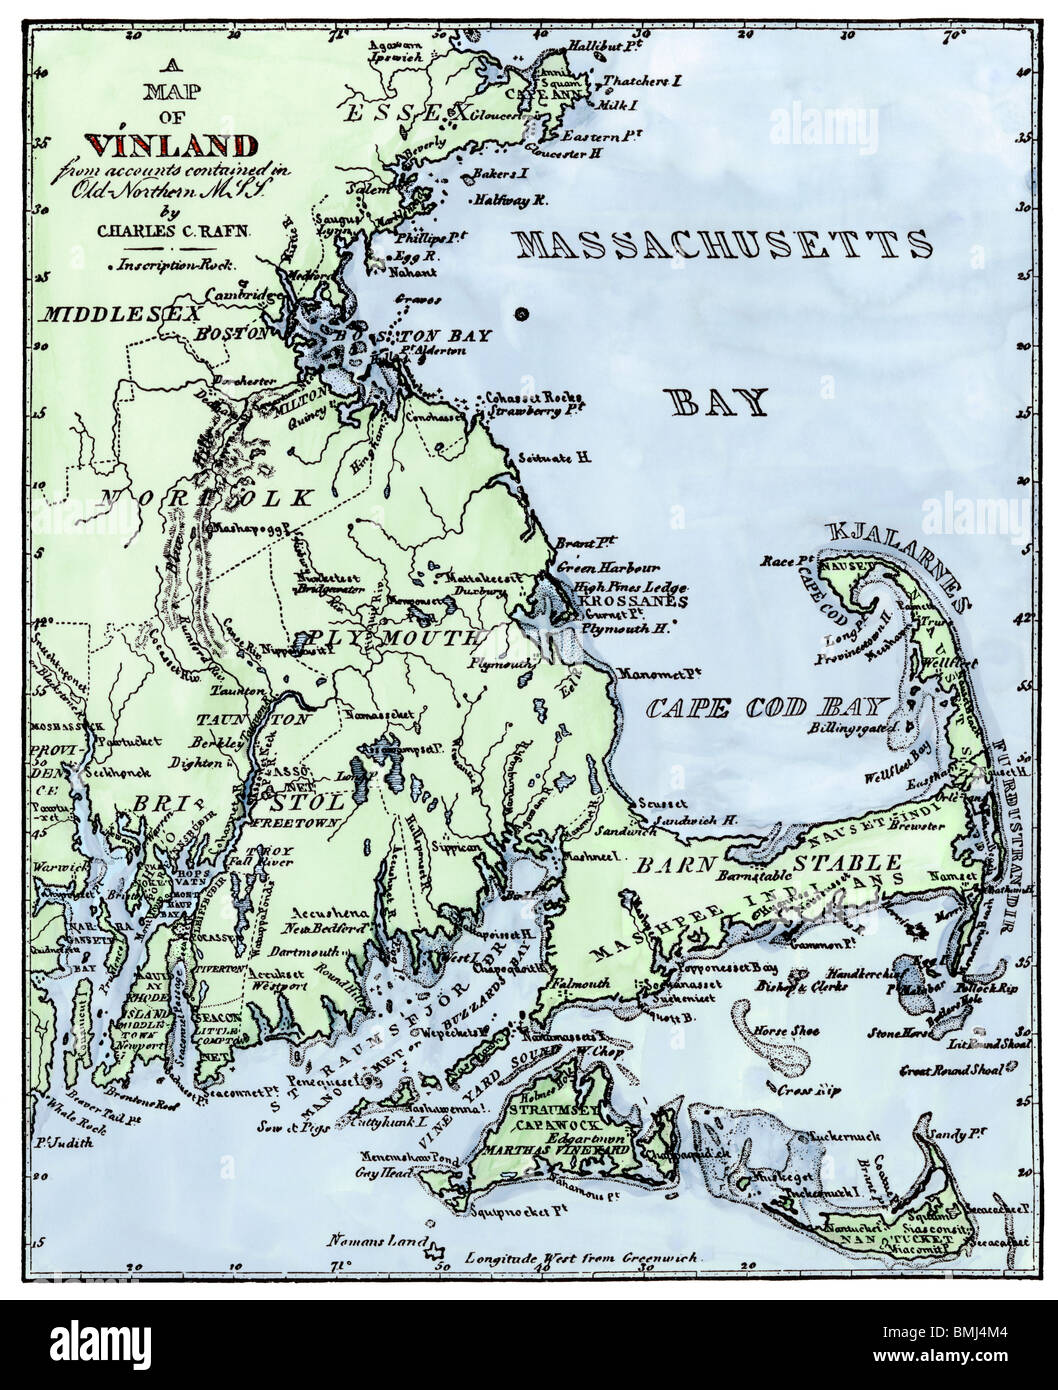 Vinland locations on Cape Cod, as portrayed by Charles Rafn, from accounts in old Norse manuscripts. Hand-colored woodcut Stock Photo